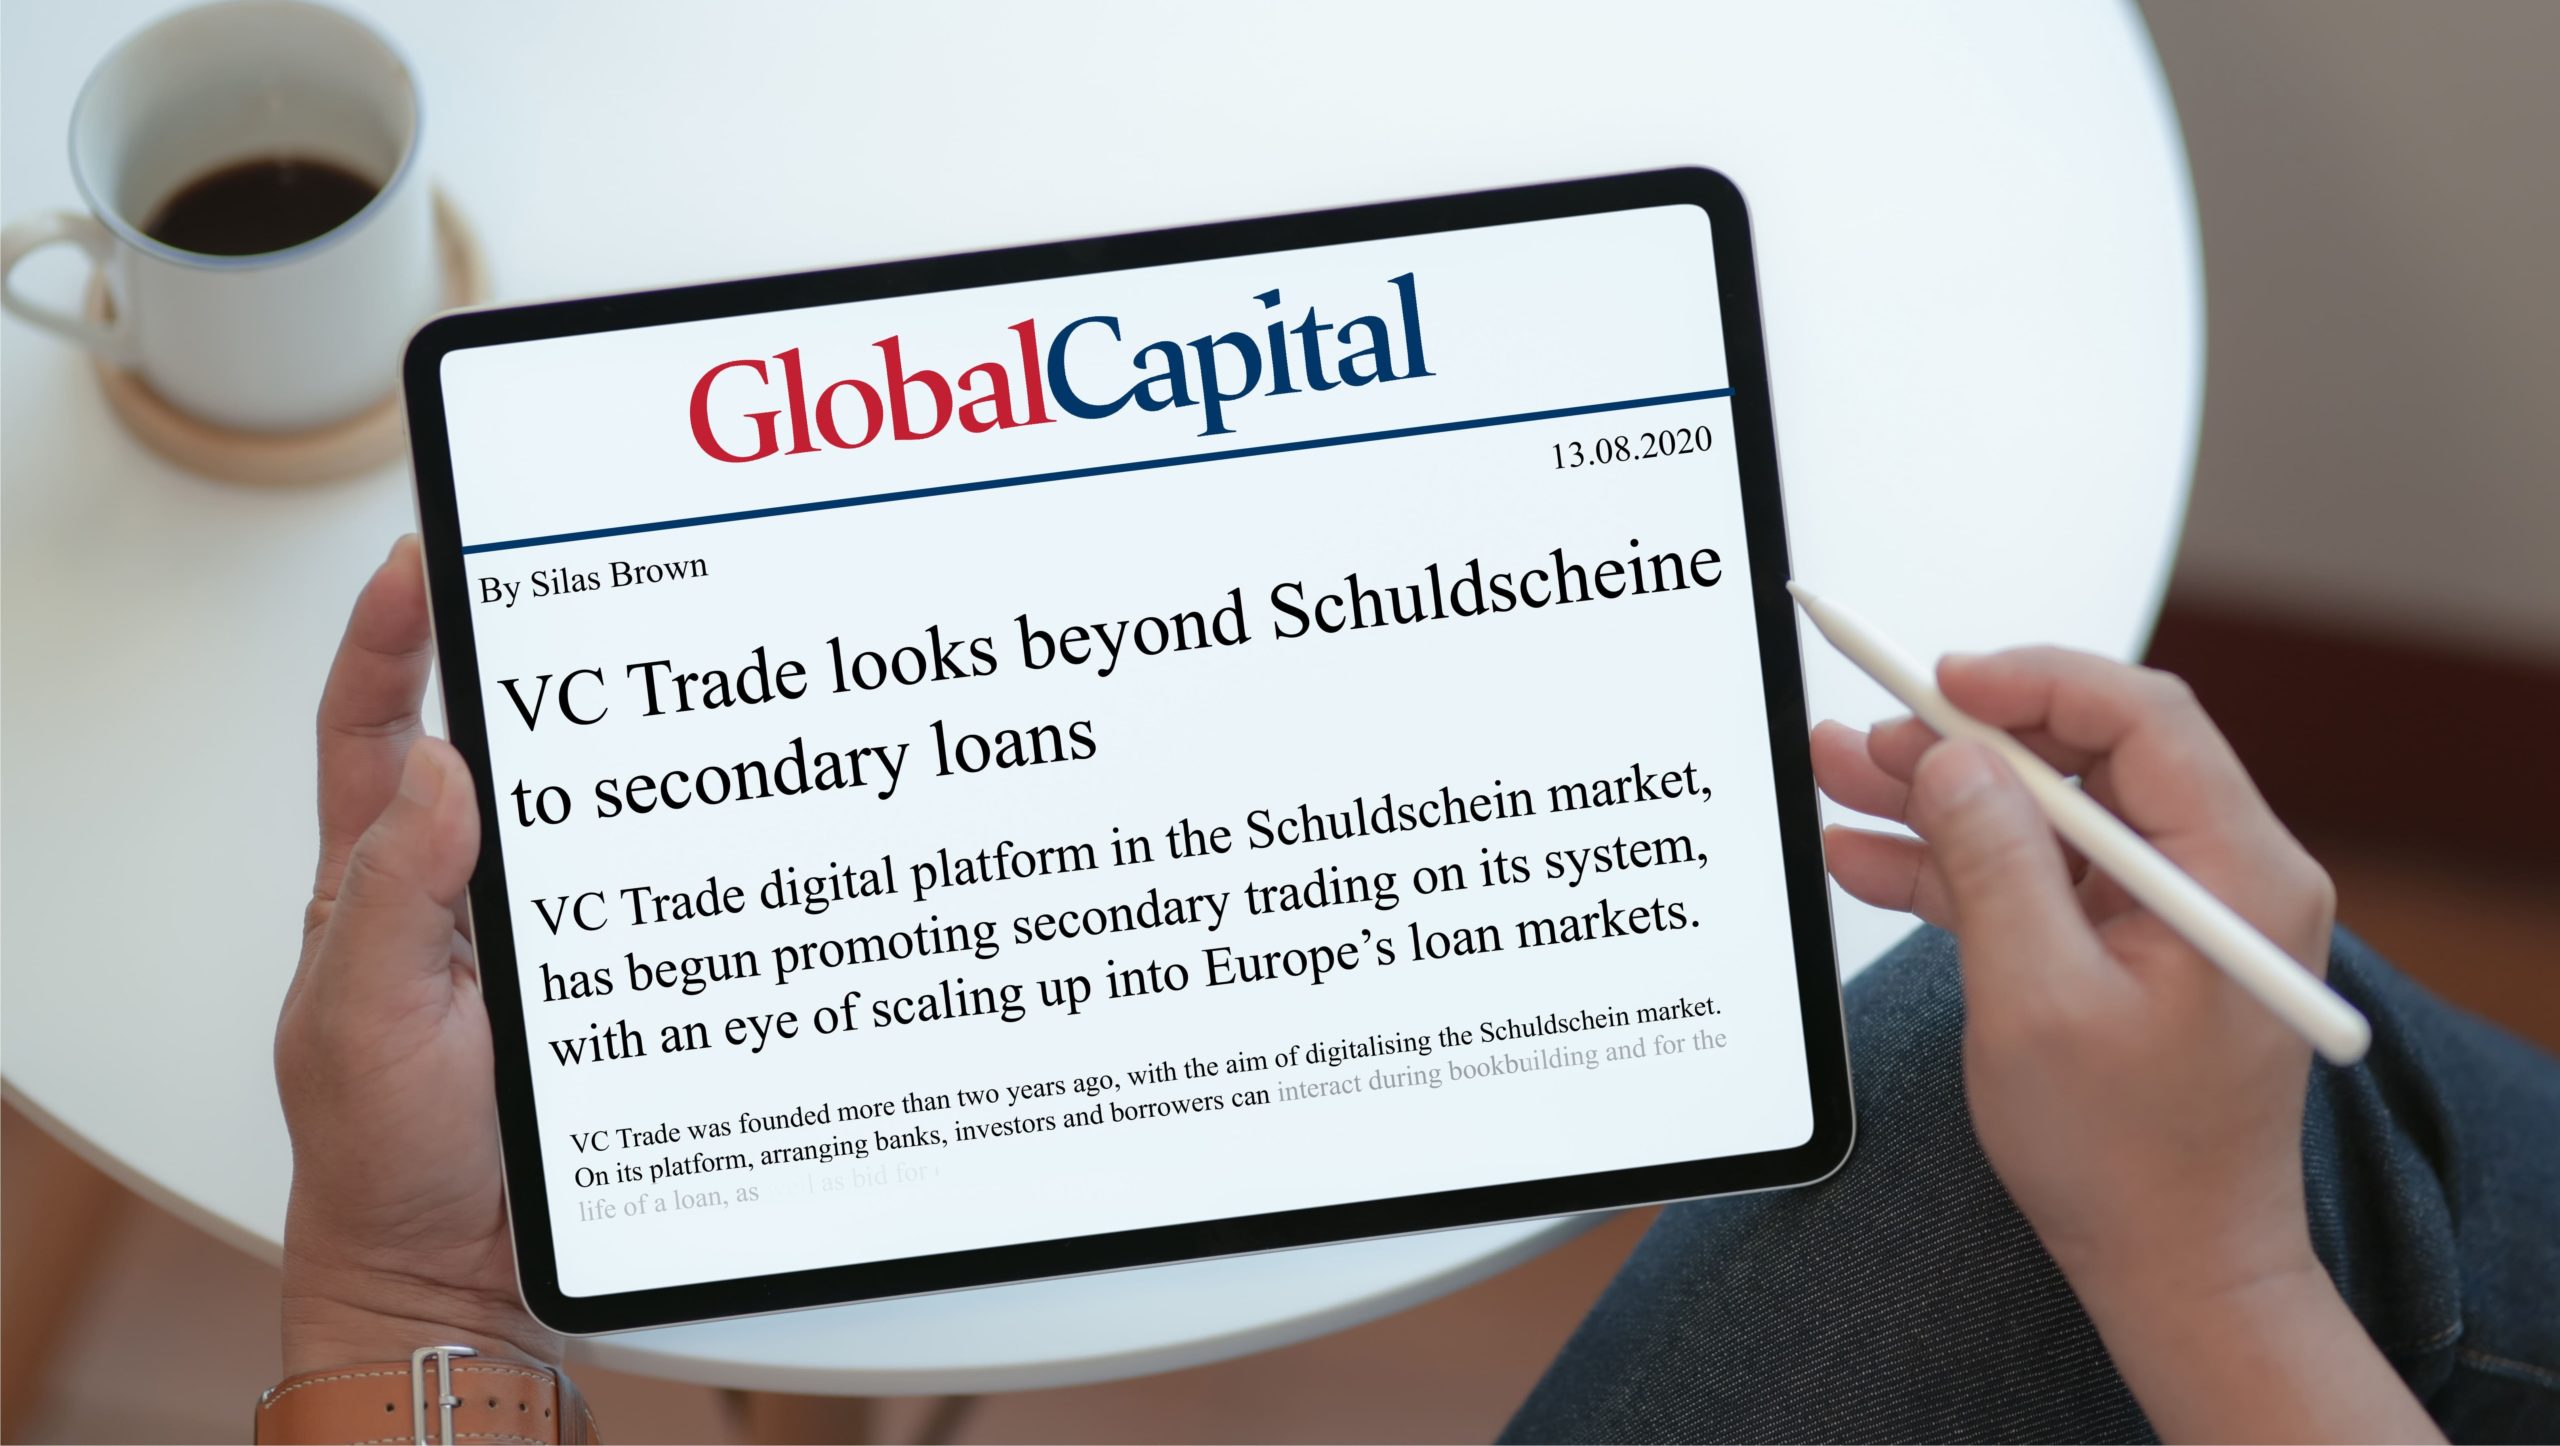 vc trade looks beyond Schuldscheine to secondary loans